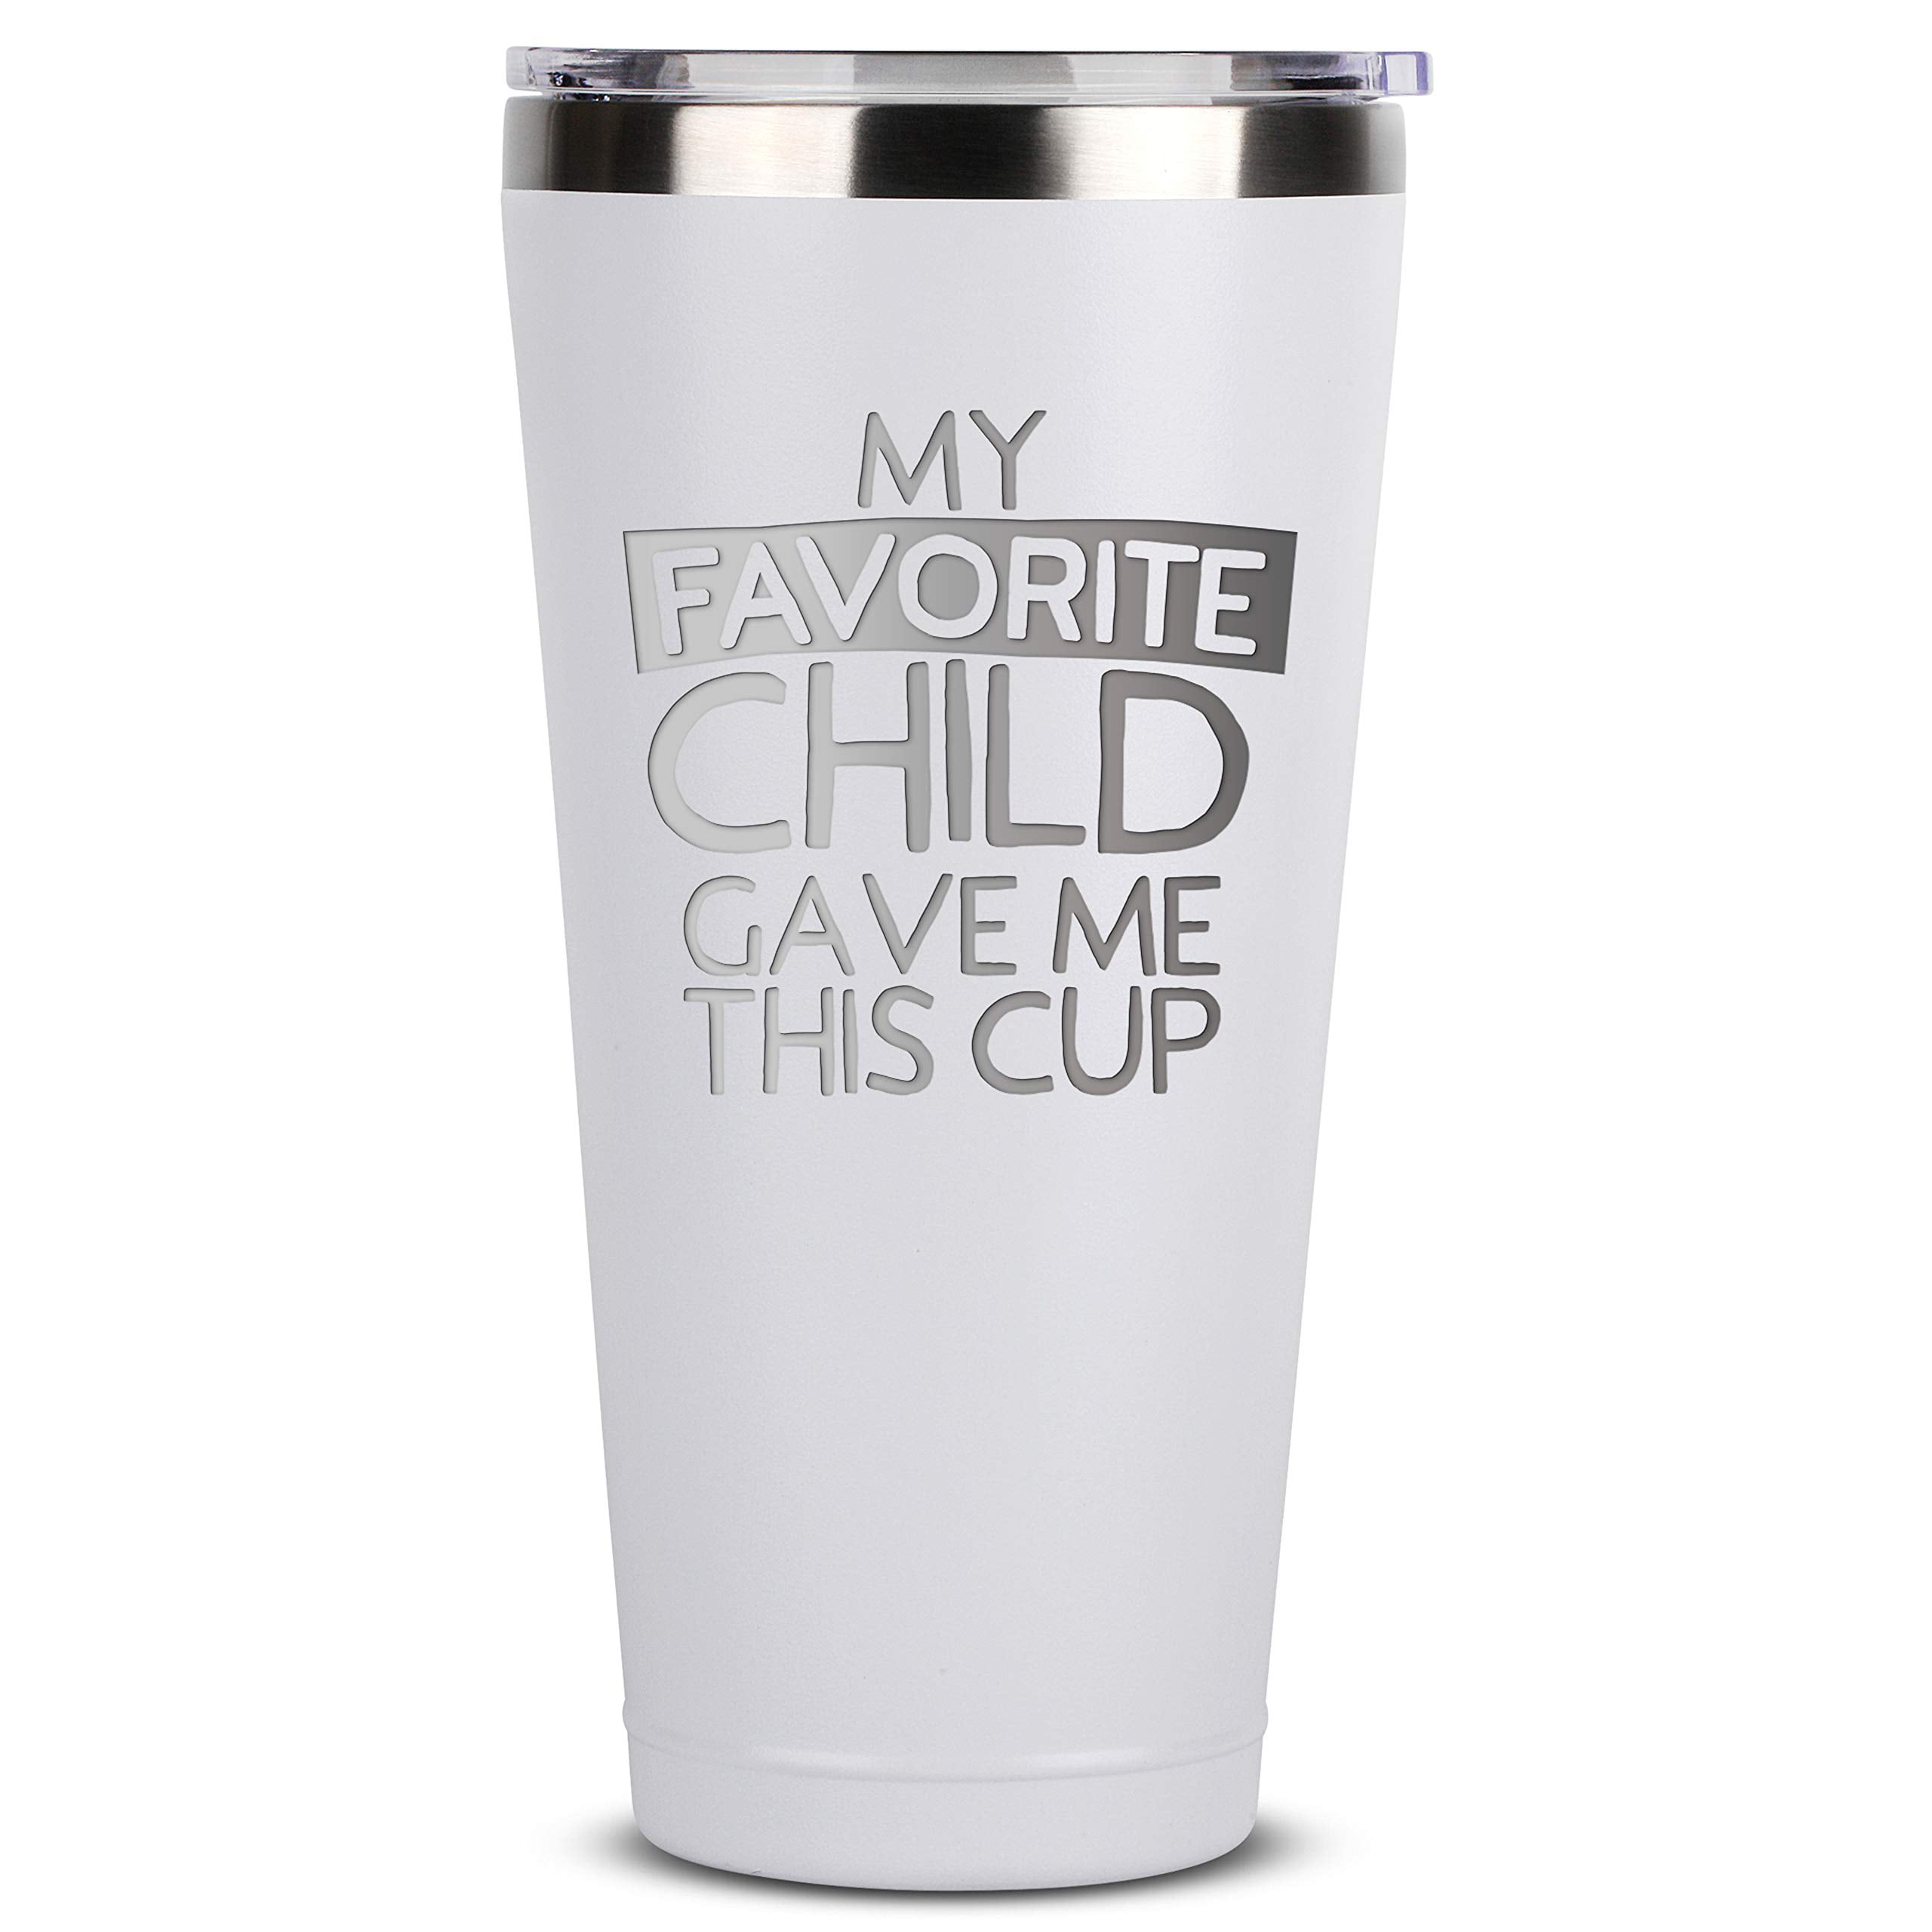 Moms Dads Gifts Mugs My Favorite Child Gave Me This Cup Birthday Mothers Fathers Day Christmas Gift Ideas from Daughter Son Kids 16 oz White Insulated Stainless Steel Tumbler w/Lid for Mom Dad 